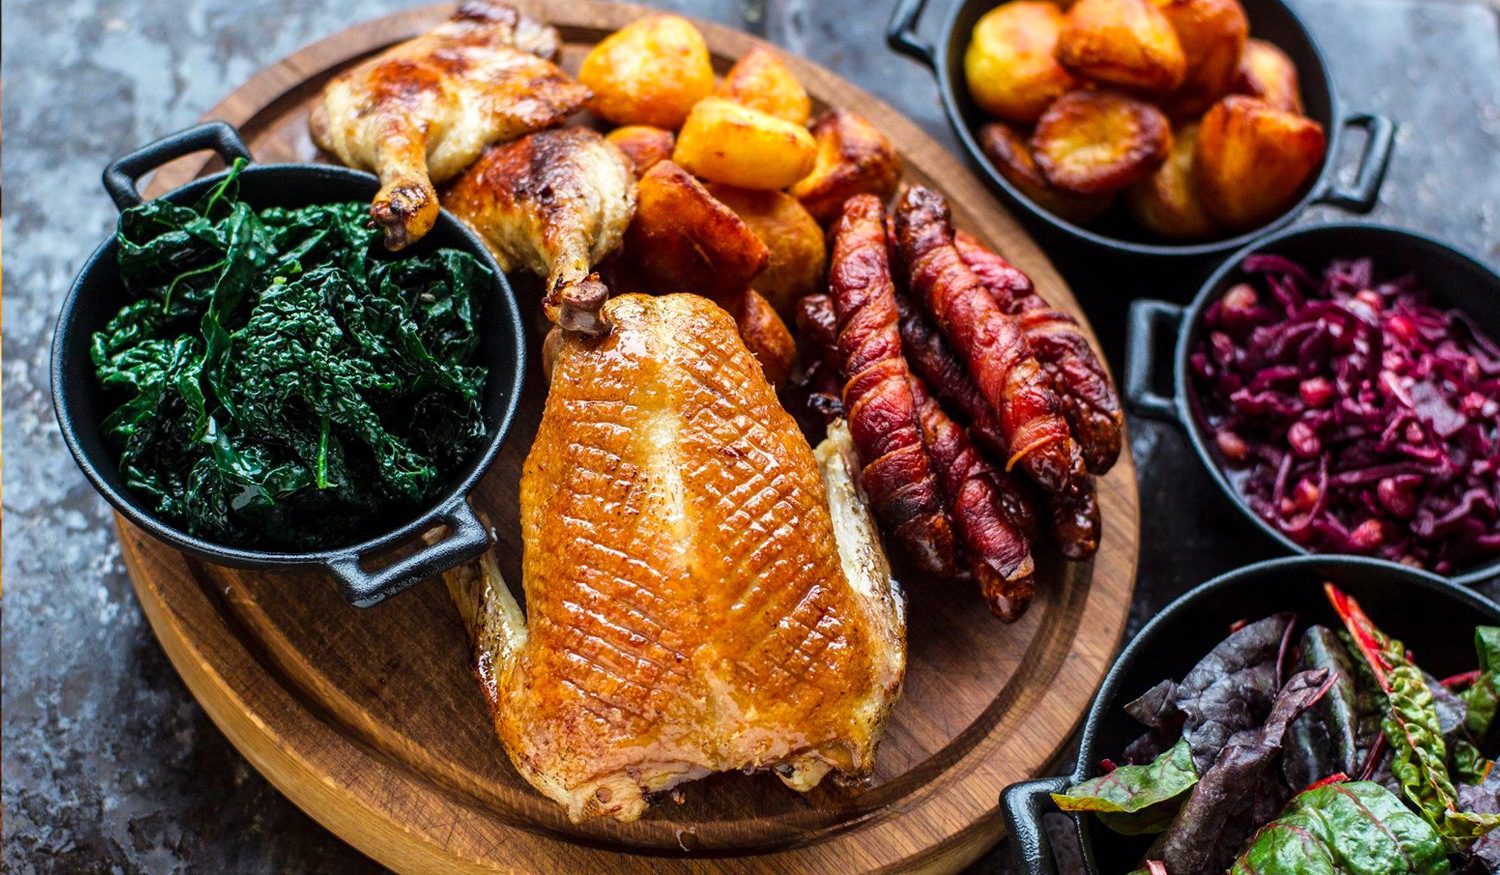 The Best Places To Eat Sunday Lunch In The UK: 2022 Edition